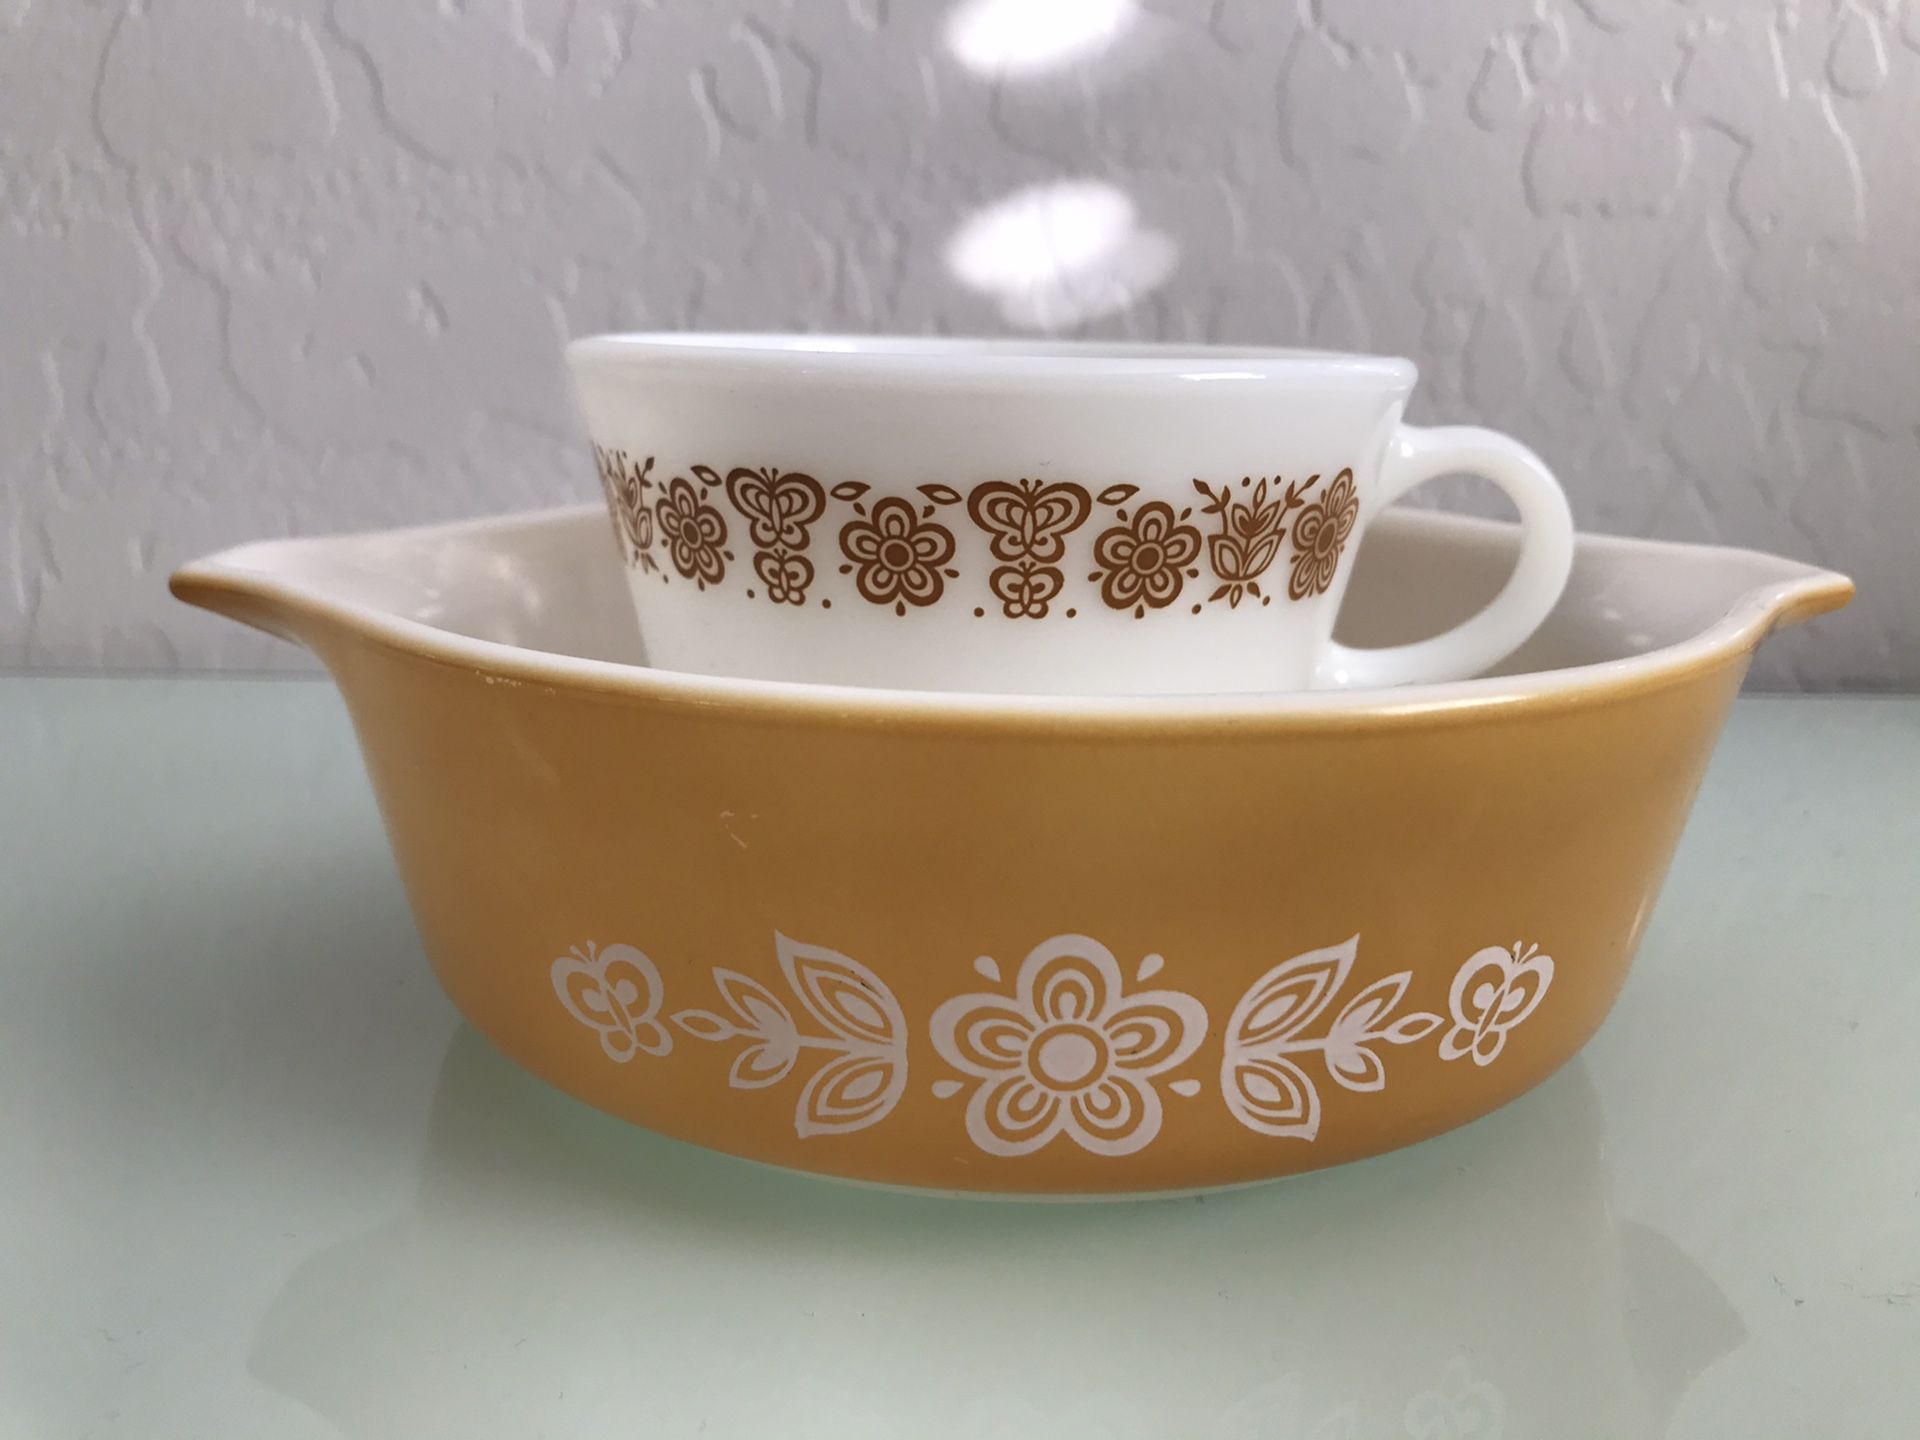 Vintage Pyrex baking dish 500ml gold butterfly with vintage Pyrex cup